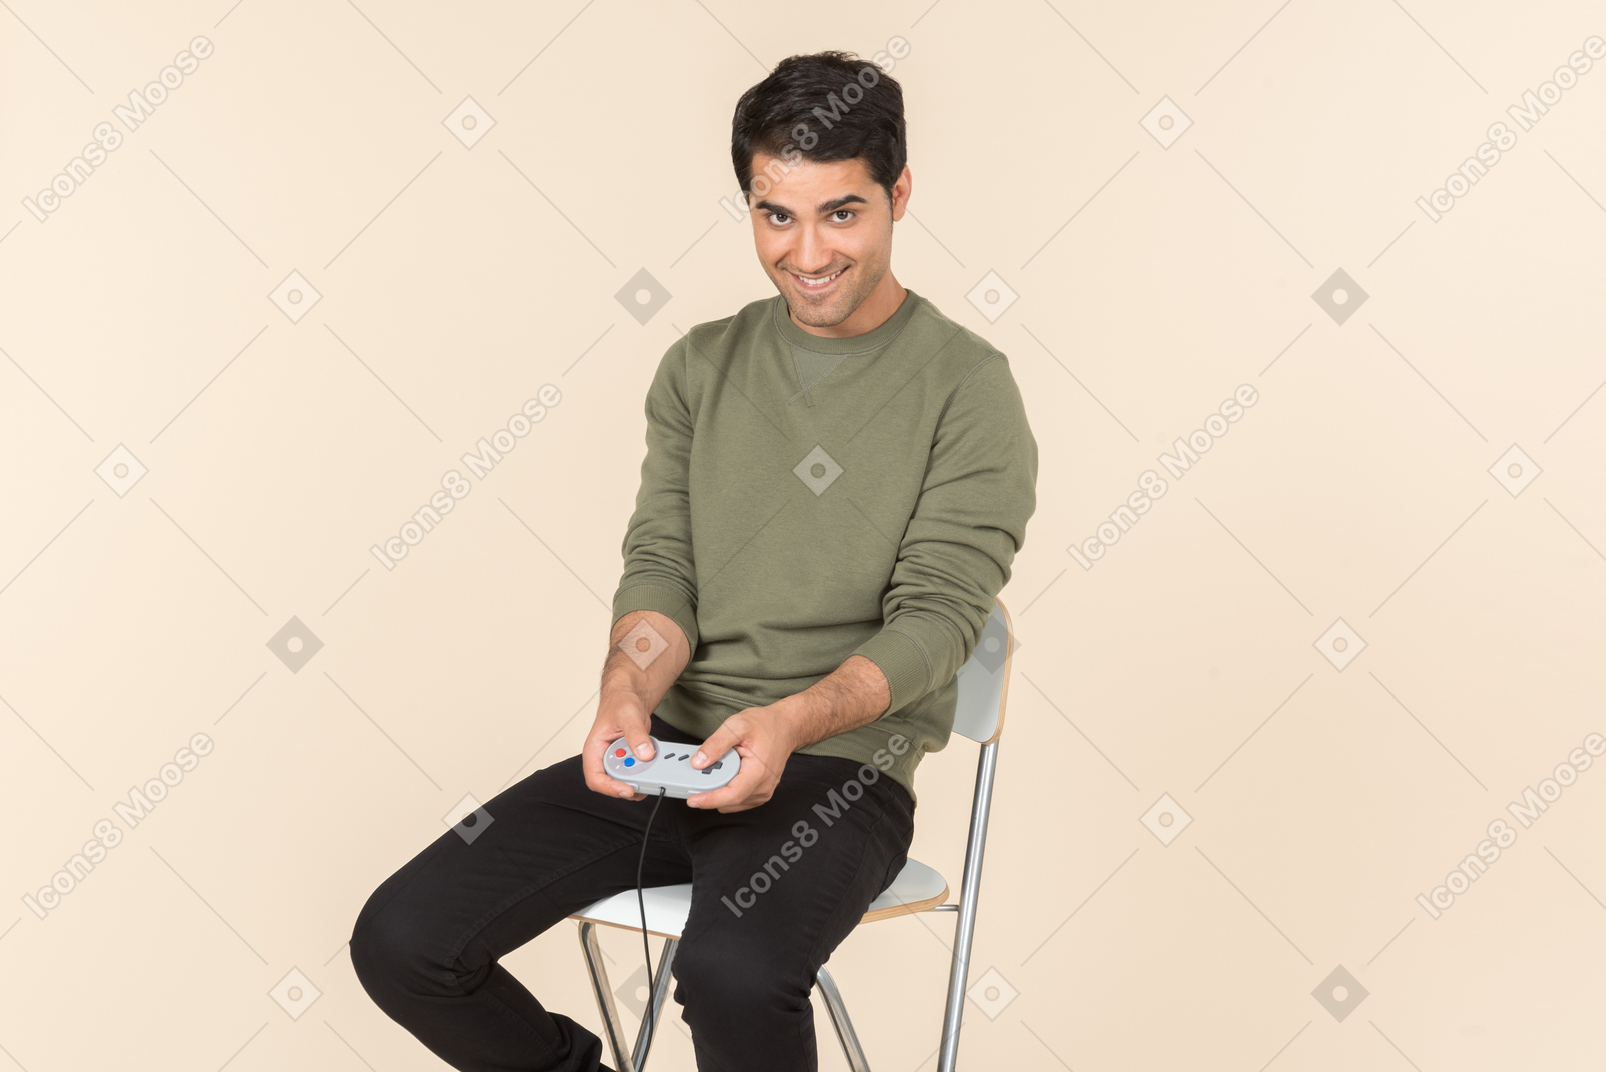 Young caucasian guy playing a videogame